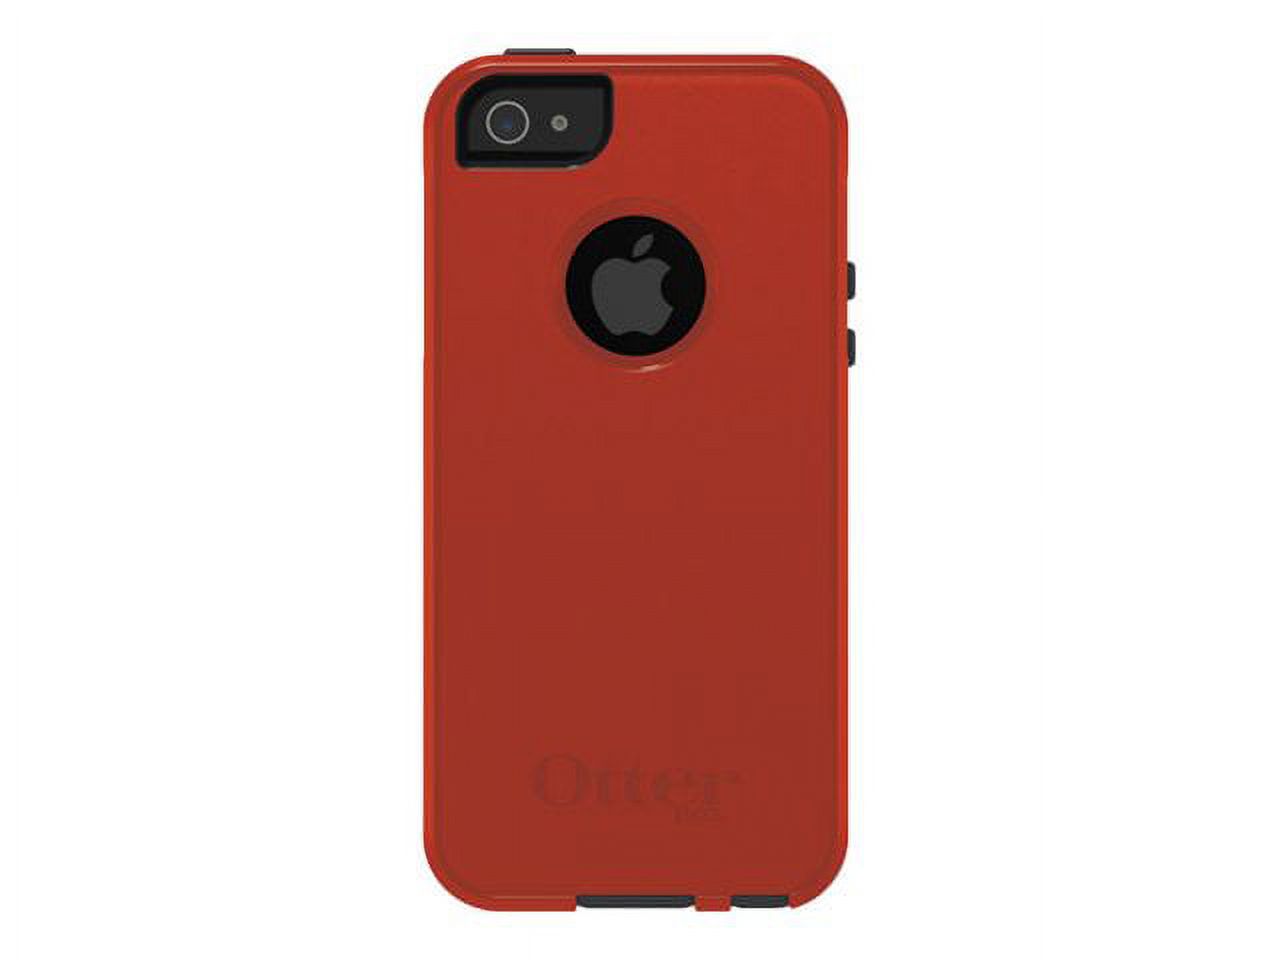 OtterBox Commuter iPhone Case - image 2 of 2